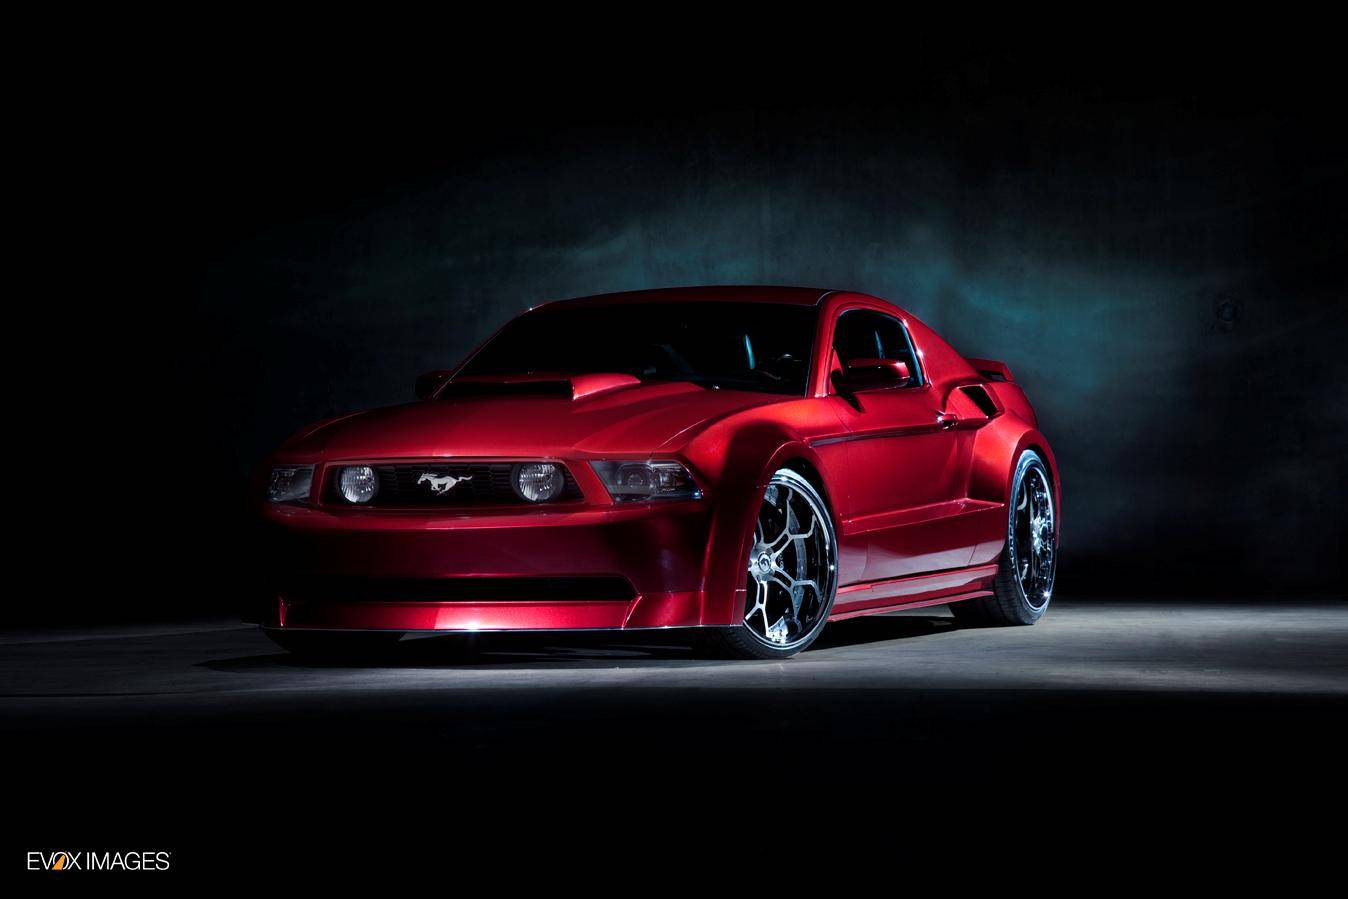 Black Ford Mustang Wallpapers - Top Free Black Ford ...